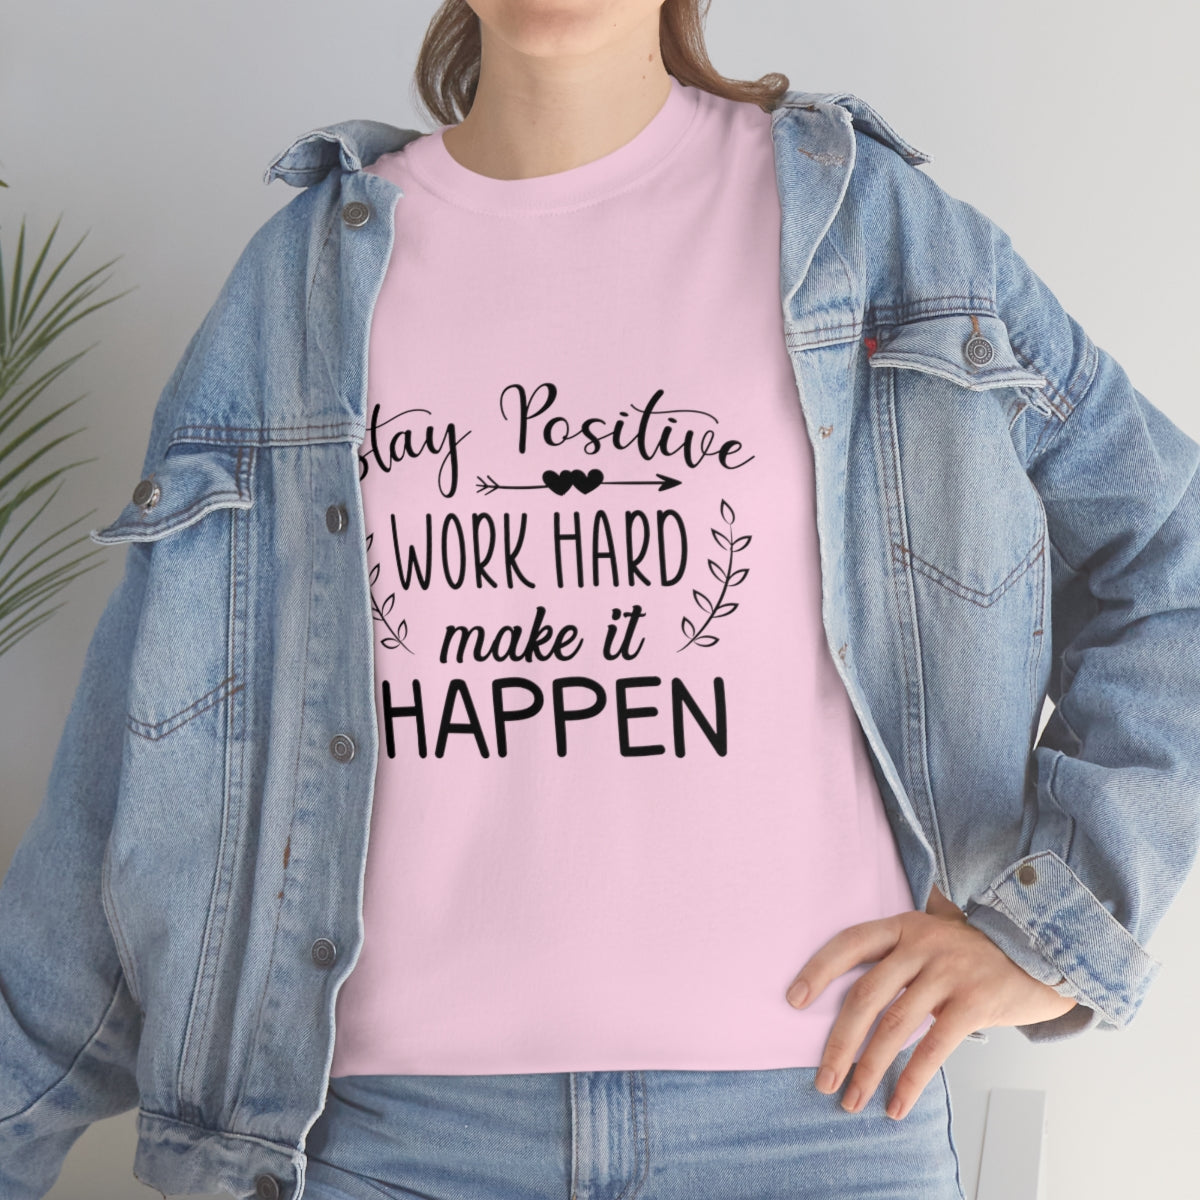 Stay Positive work hard and make it happen Unisex Heavy Cotton Tee